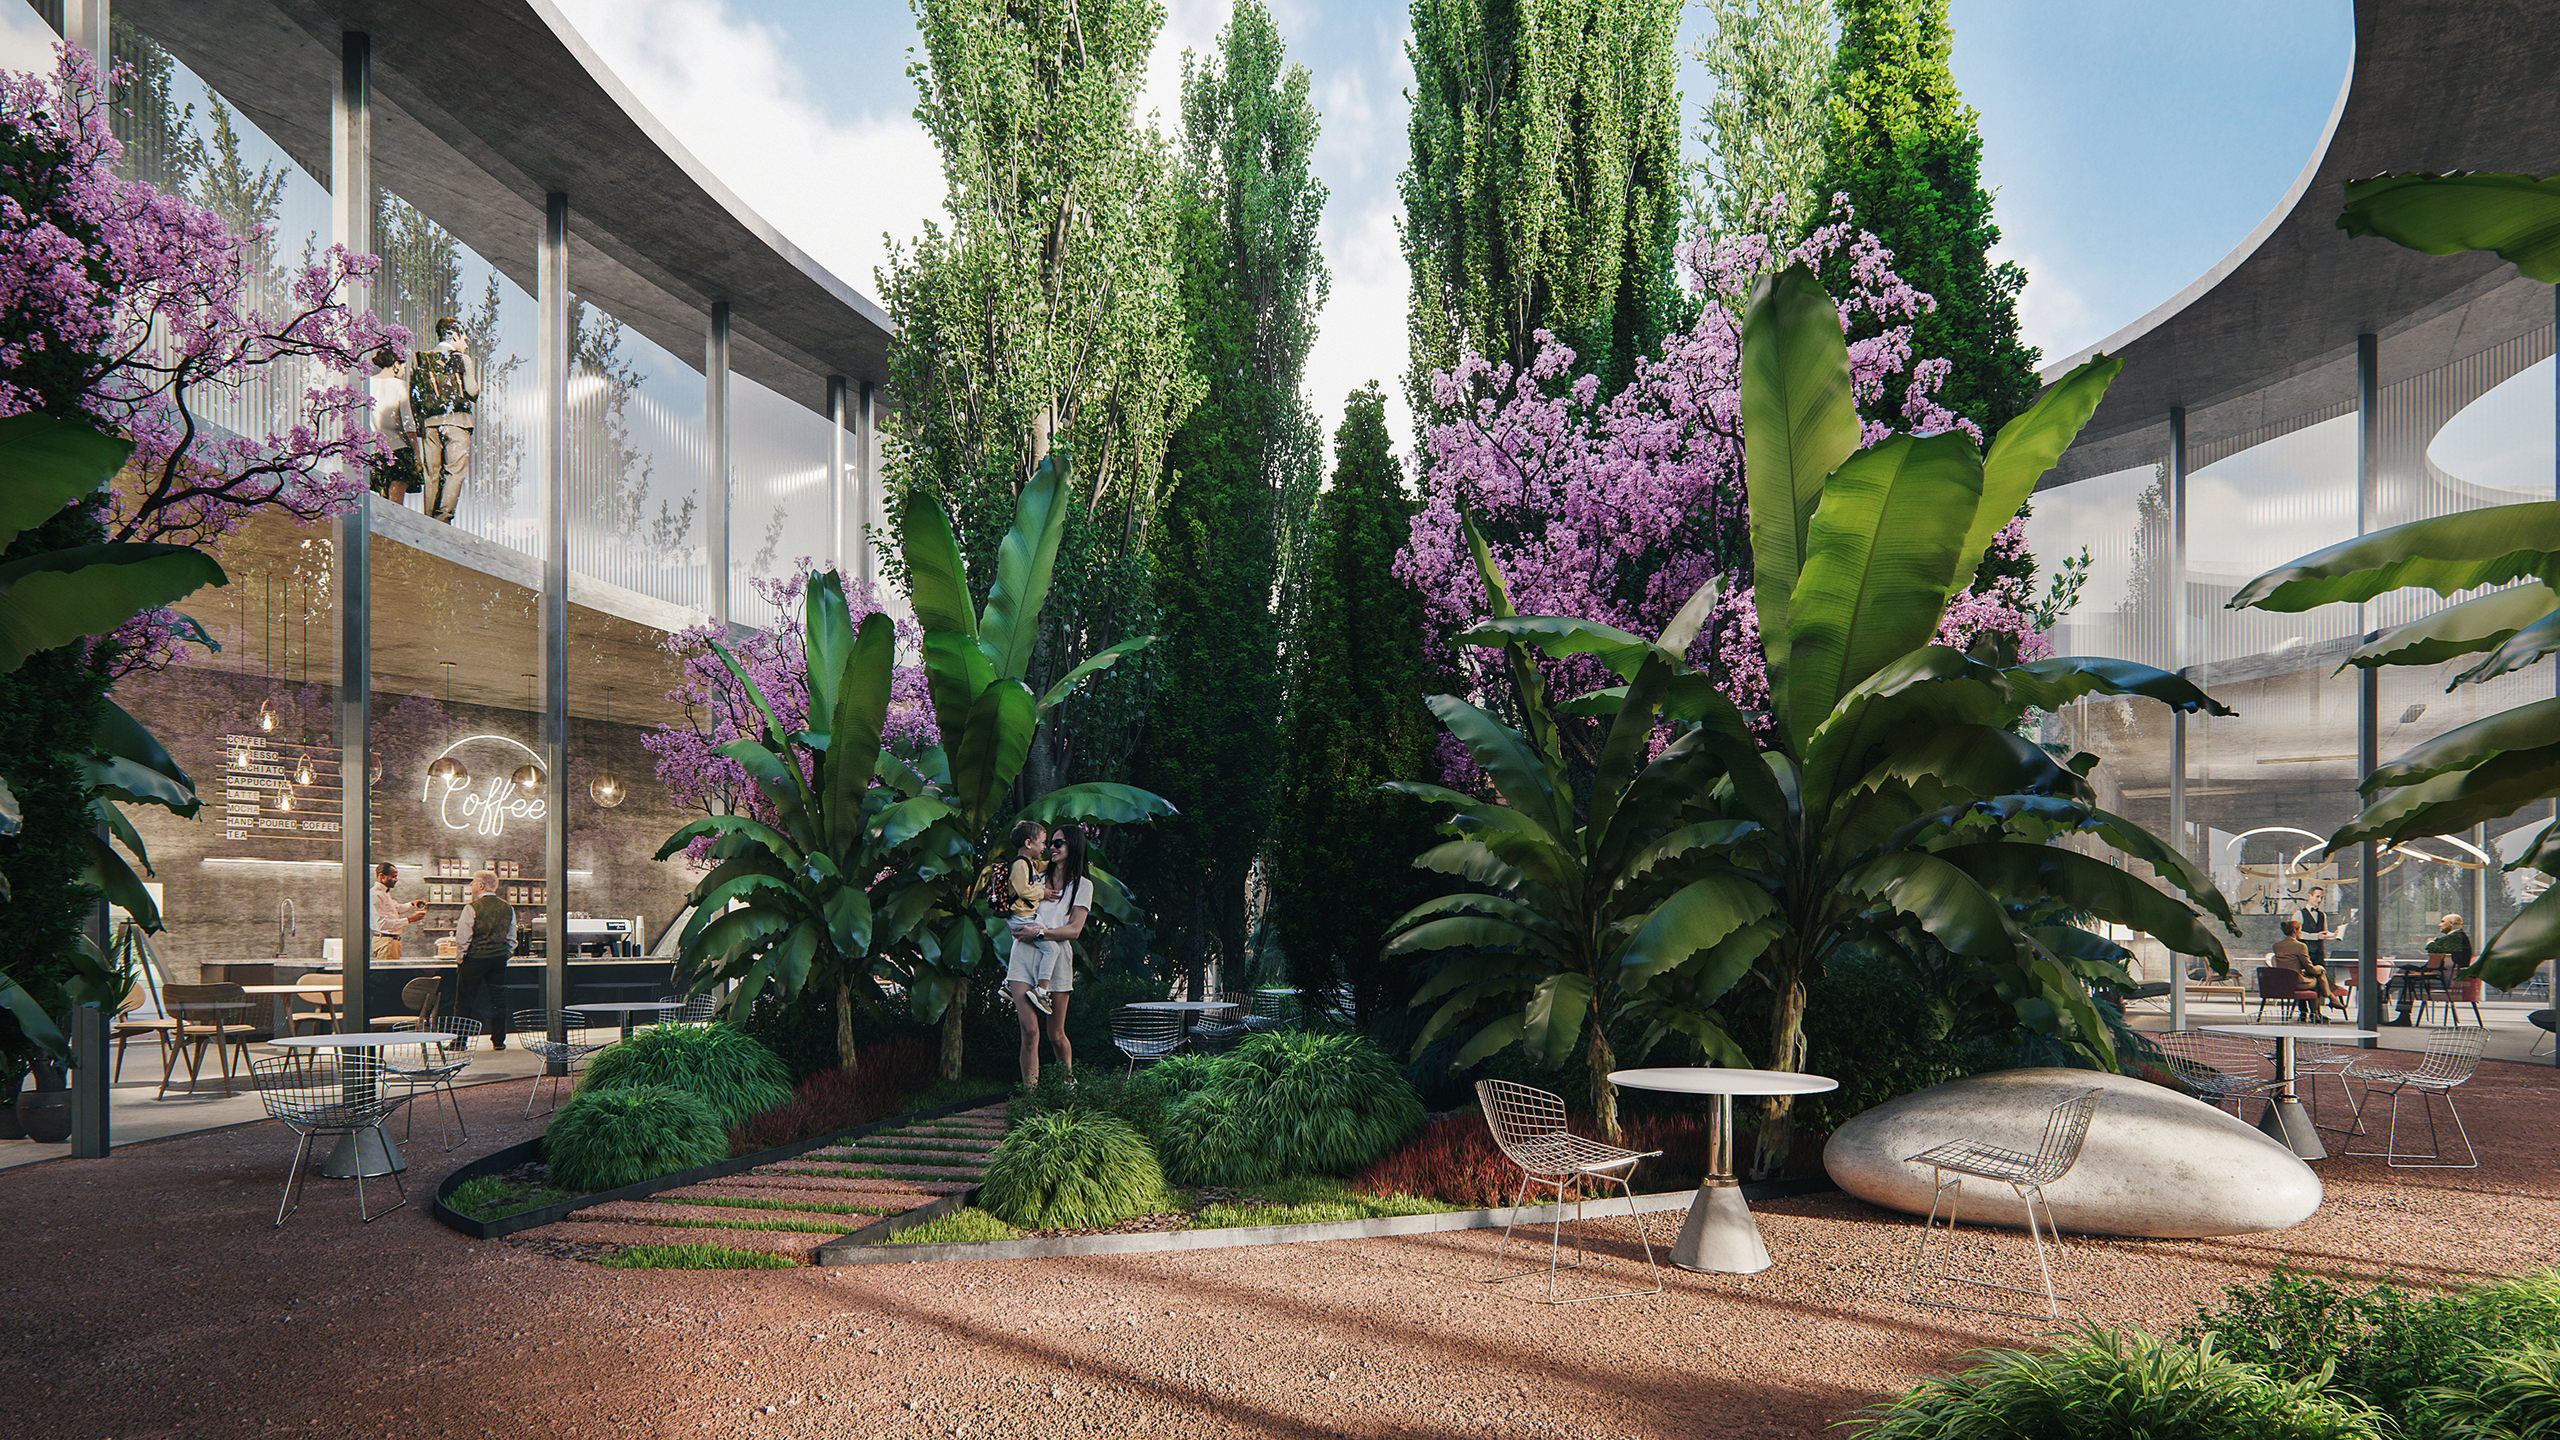 Eye-level 3D rendering of an outdoor garden-like courtyard with tall green and pinkish trees in business center, Perpignan, France